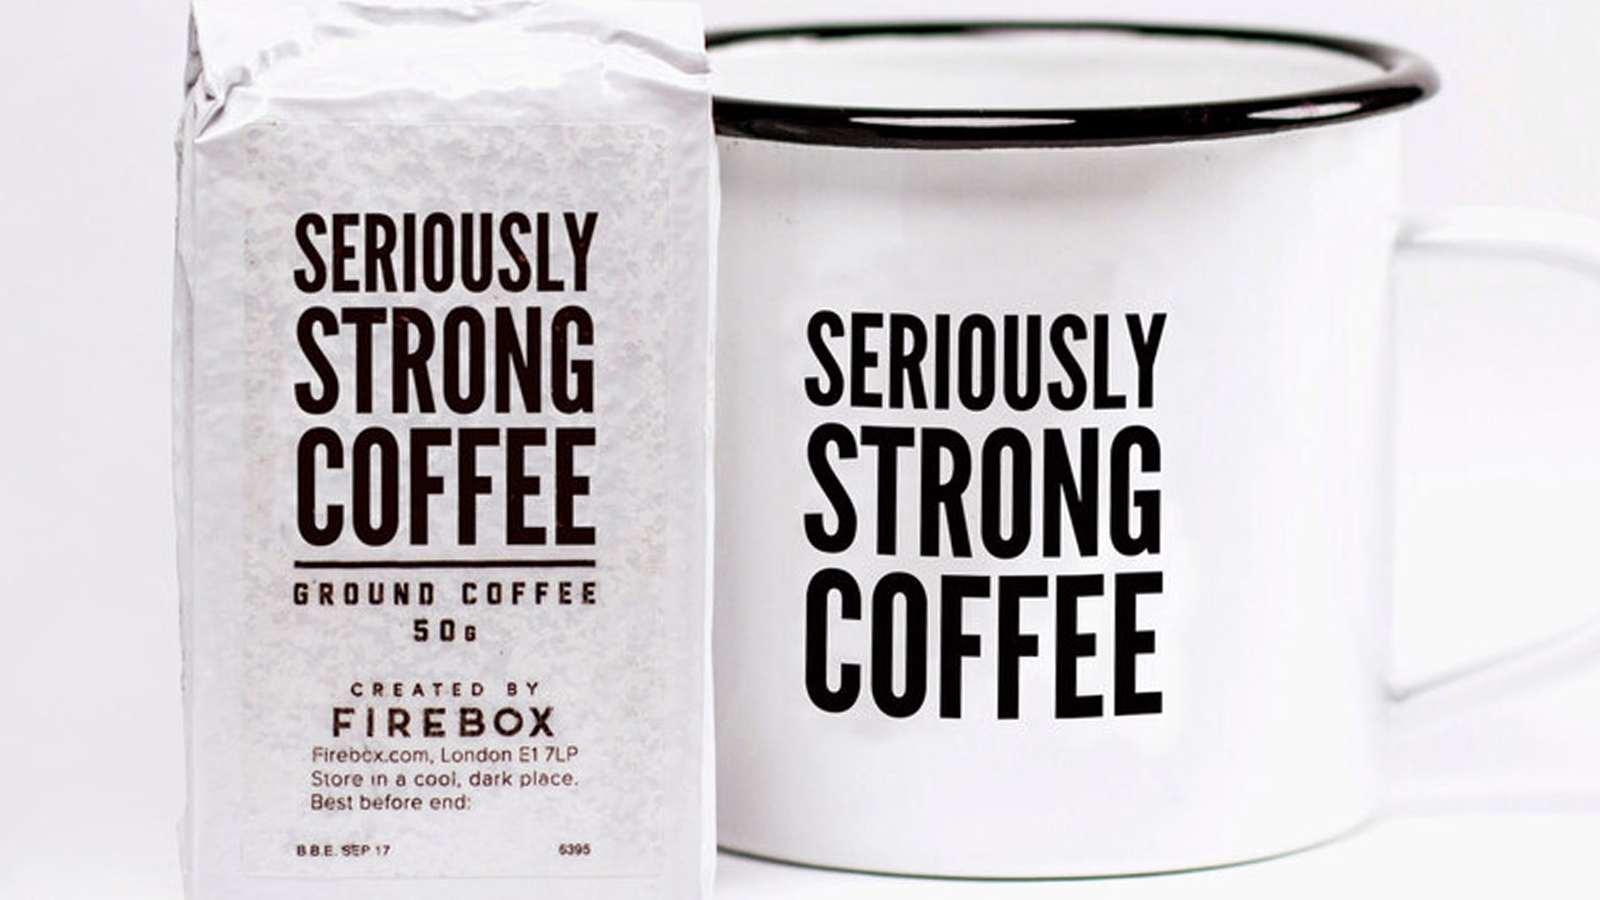 Seriously Strong Coffee kit